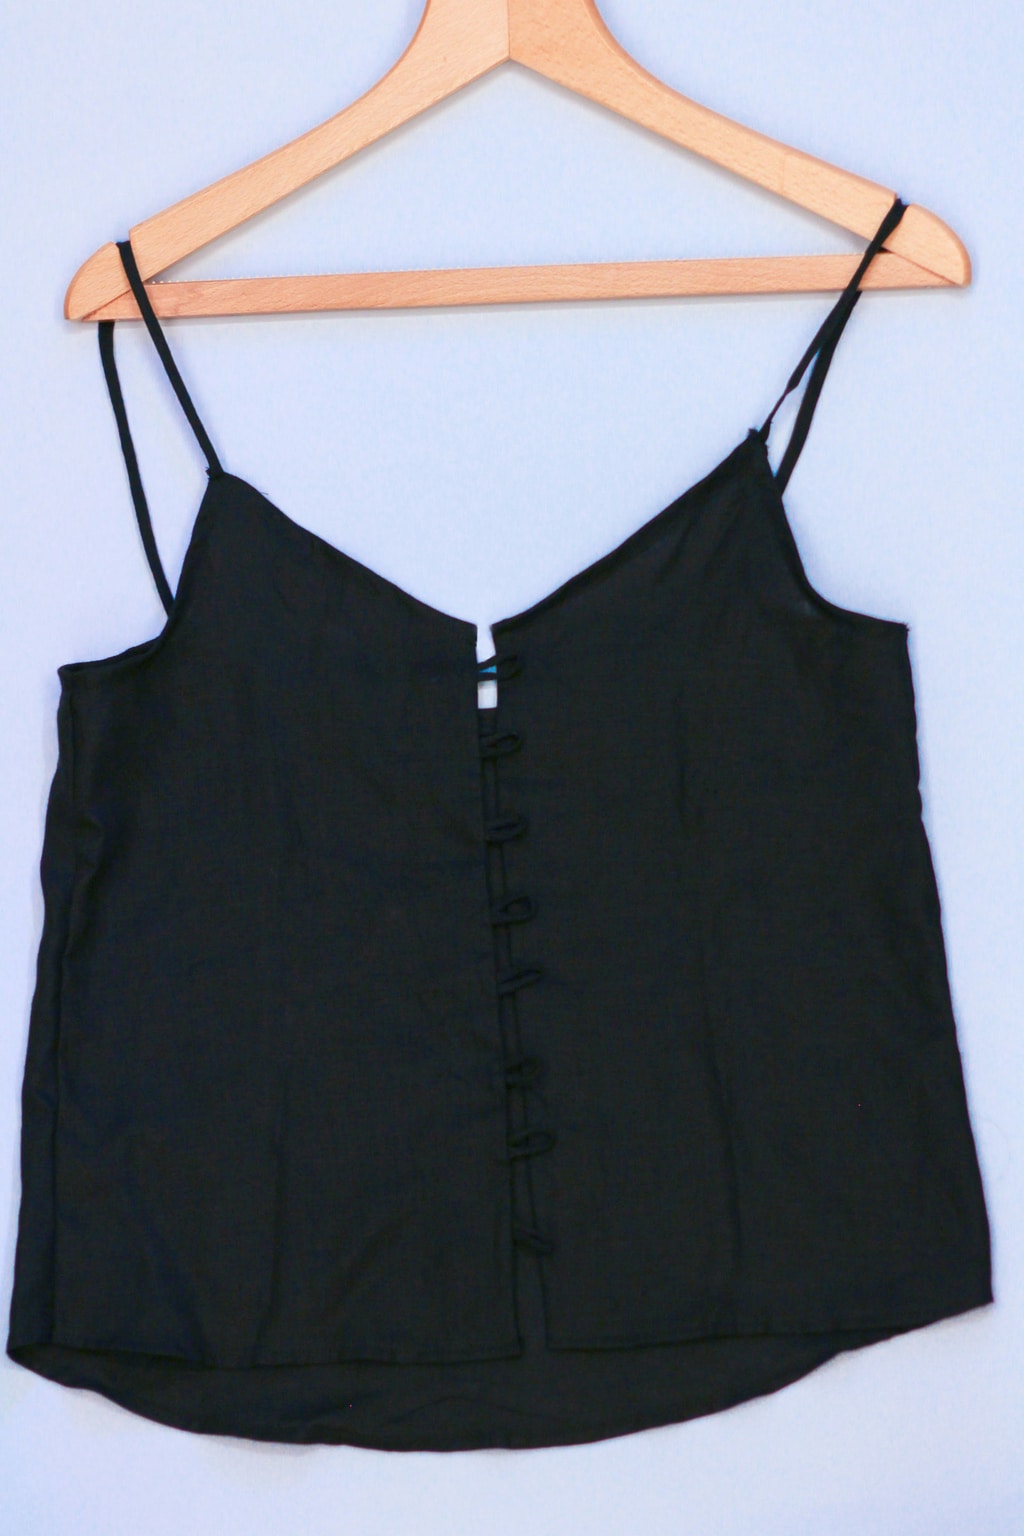 DIY Tutorial: How to Make Your Own Cami Top - College Fashion